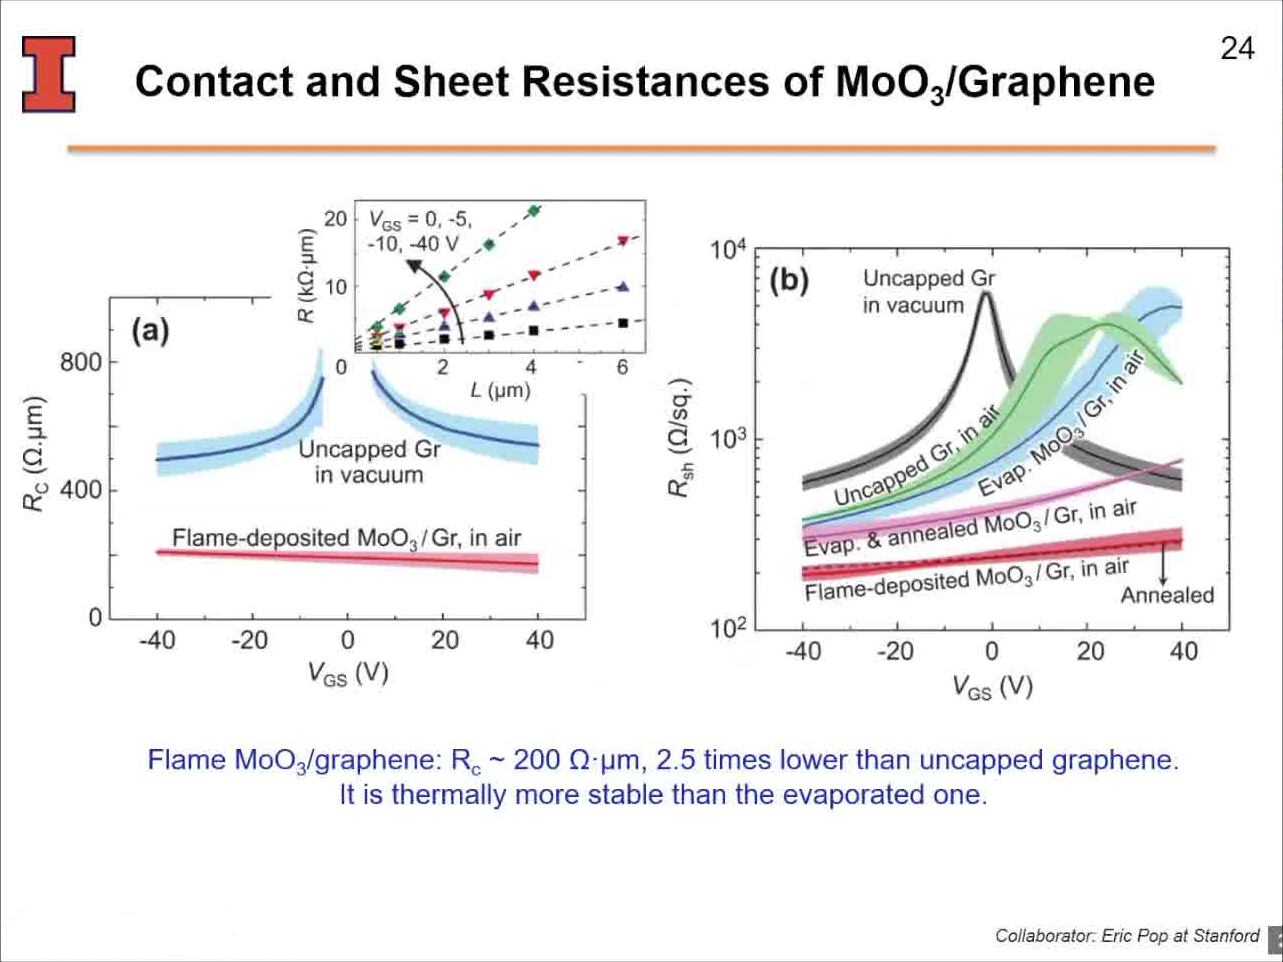 Contact and Sheet Resistances of MoO3/Graphene